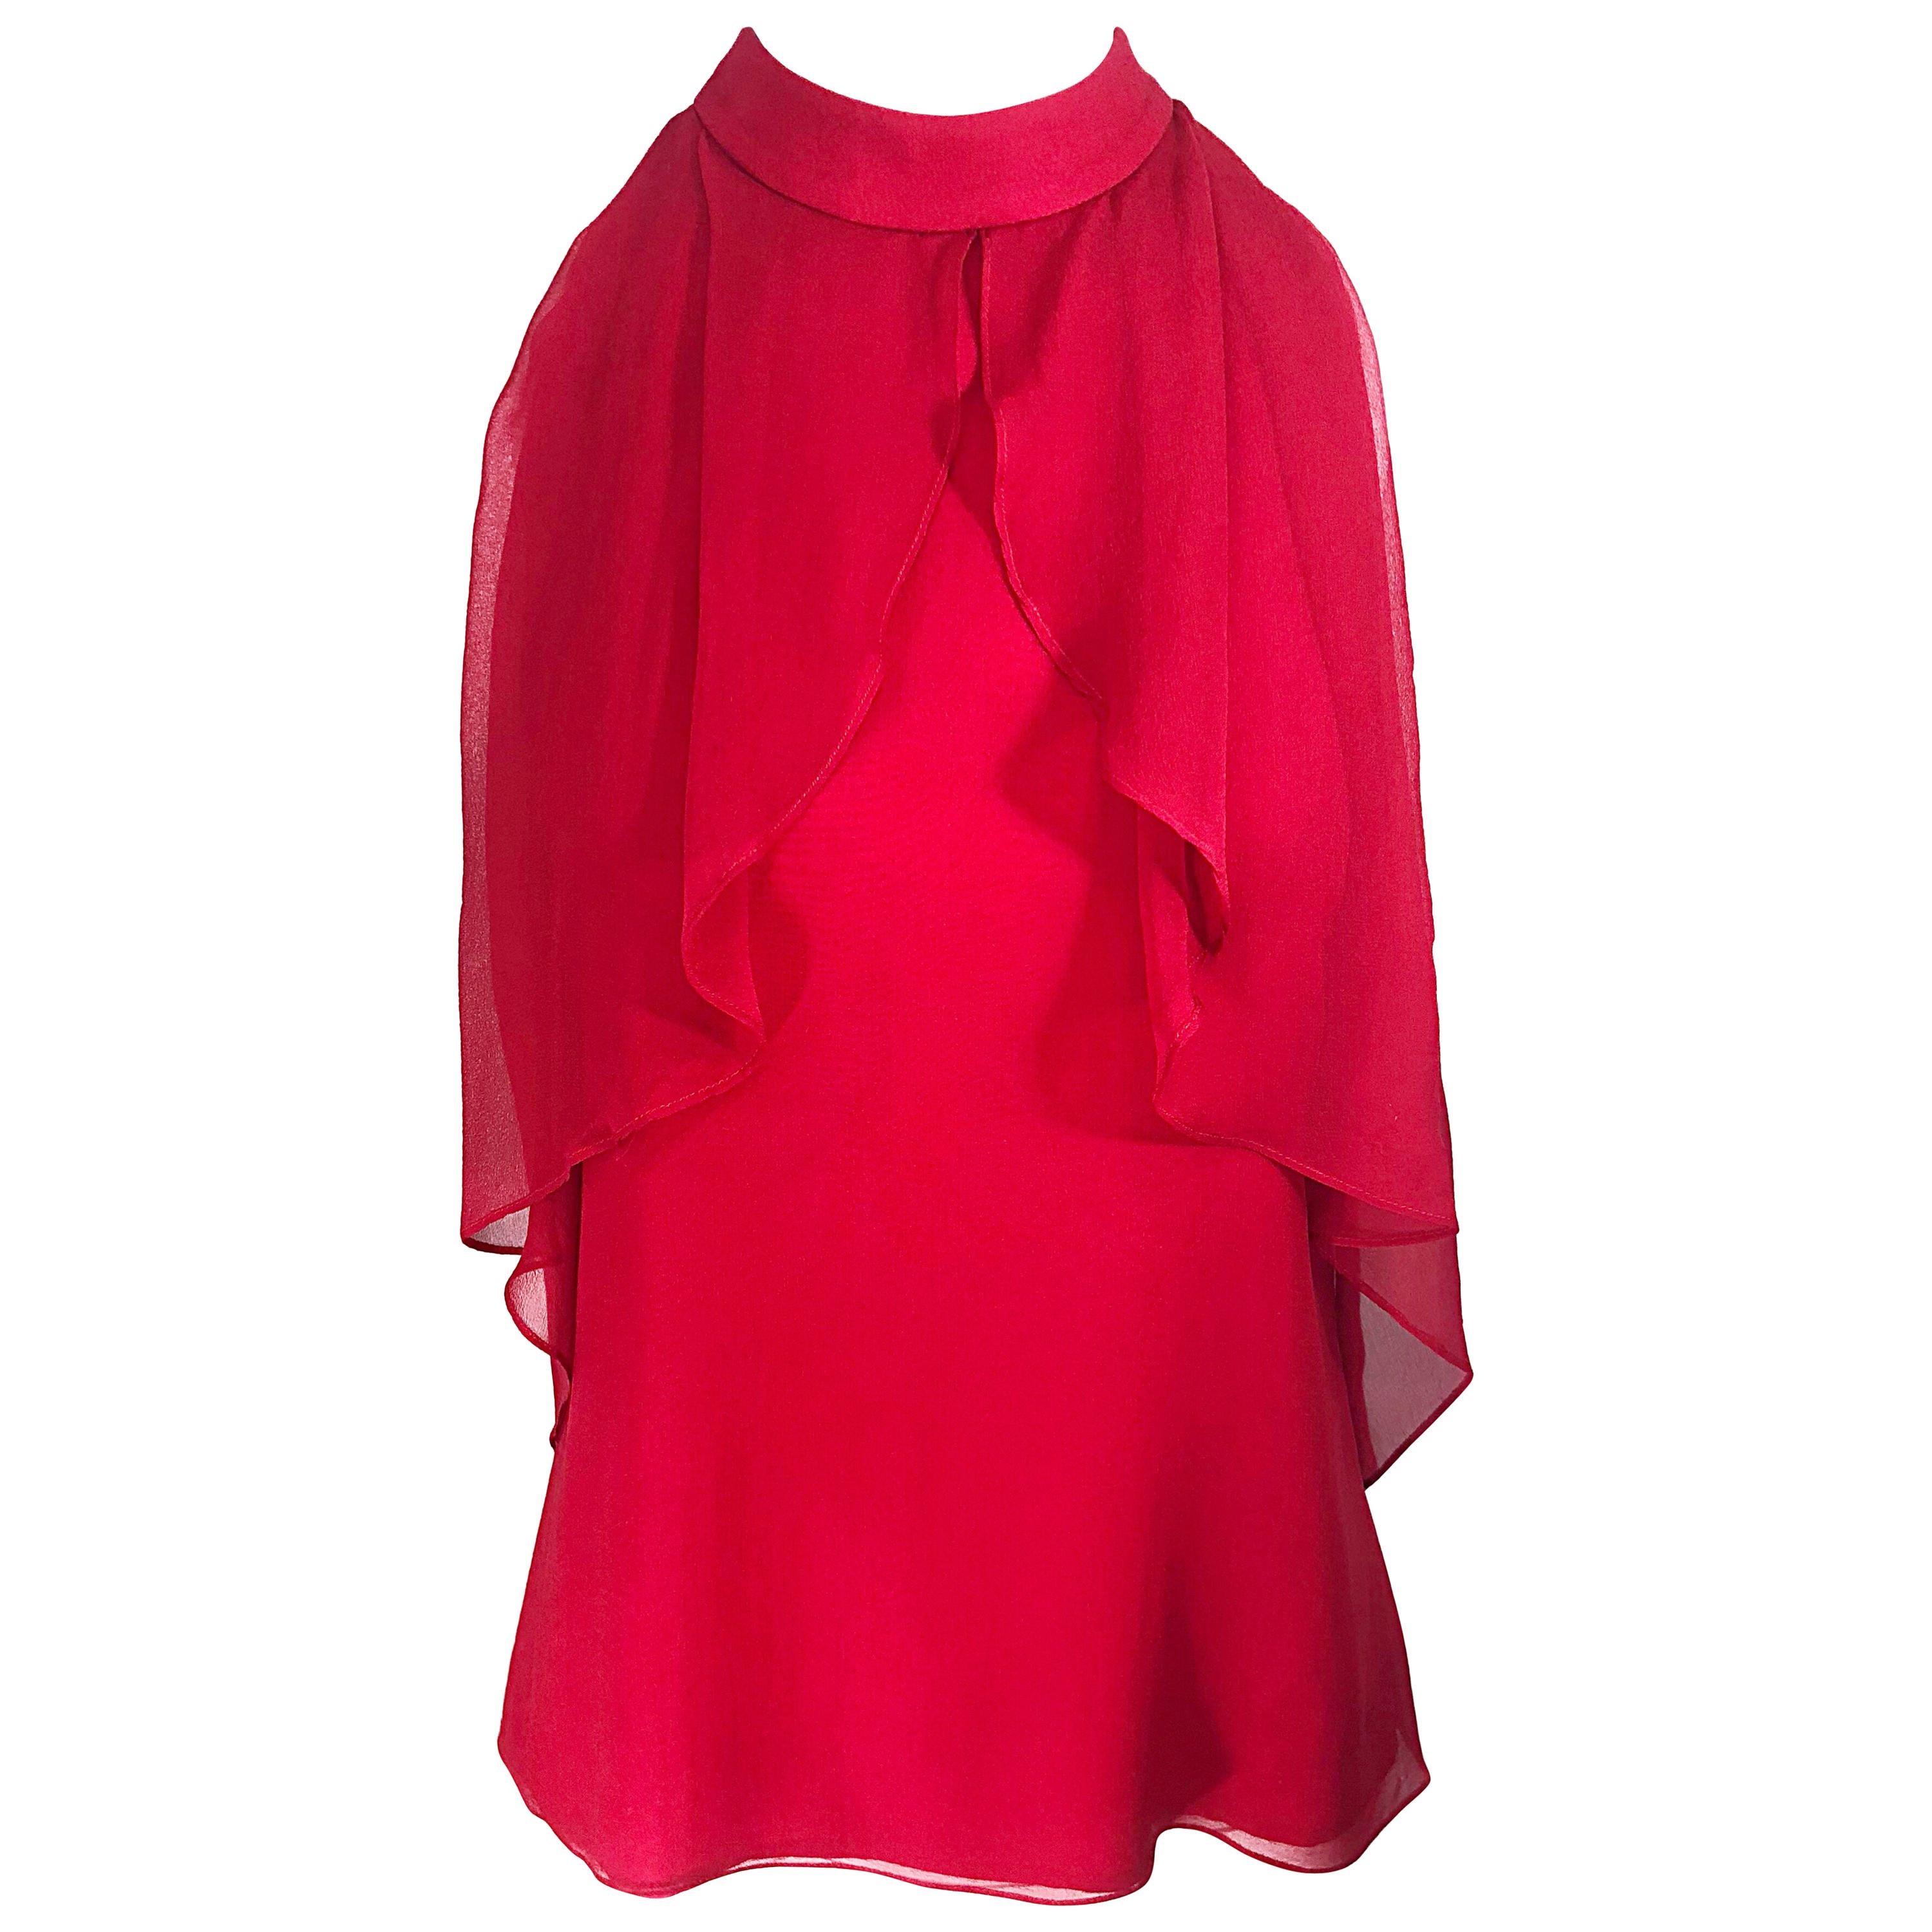 Christopher Dean Early 2000s Lipstick Red Size 4 Silk Chiffon Blouse Top For Sale